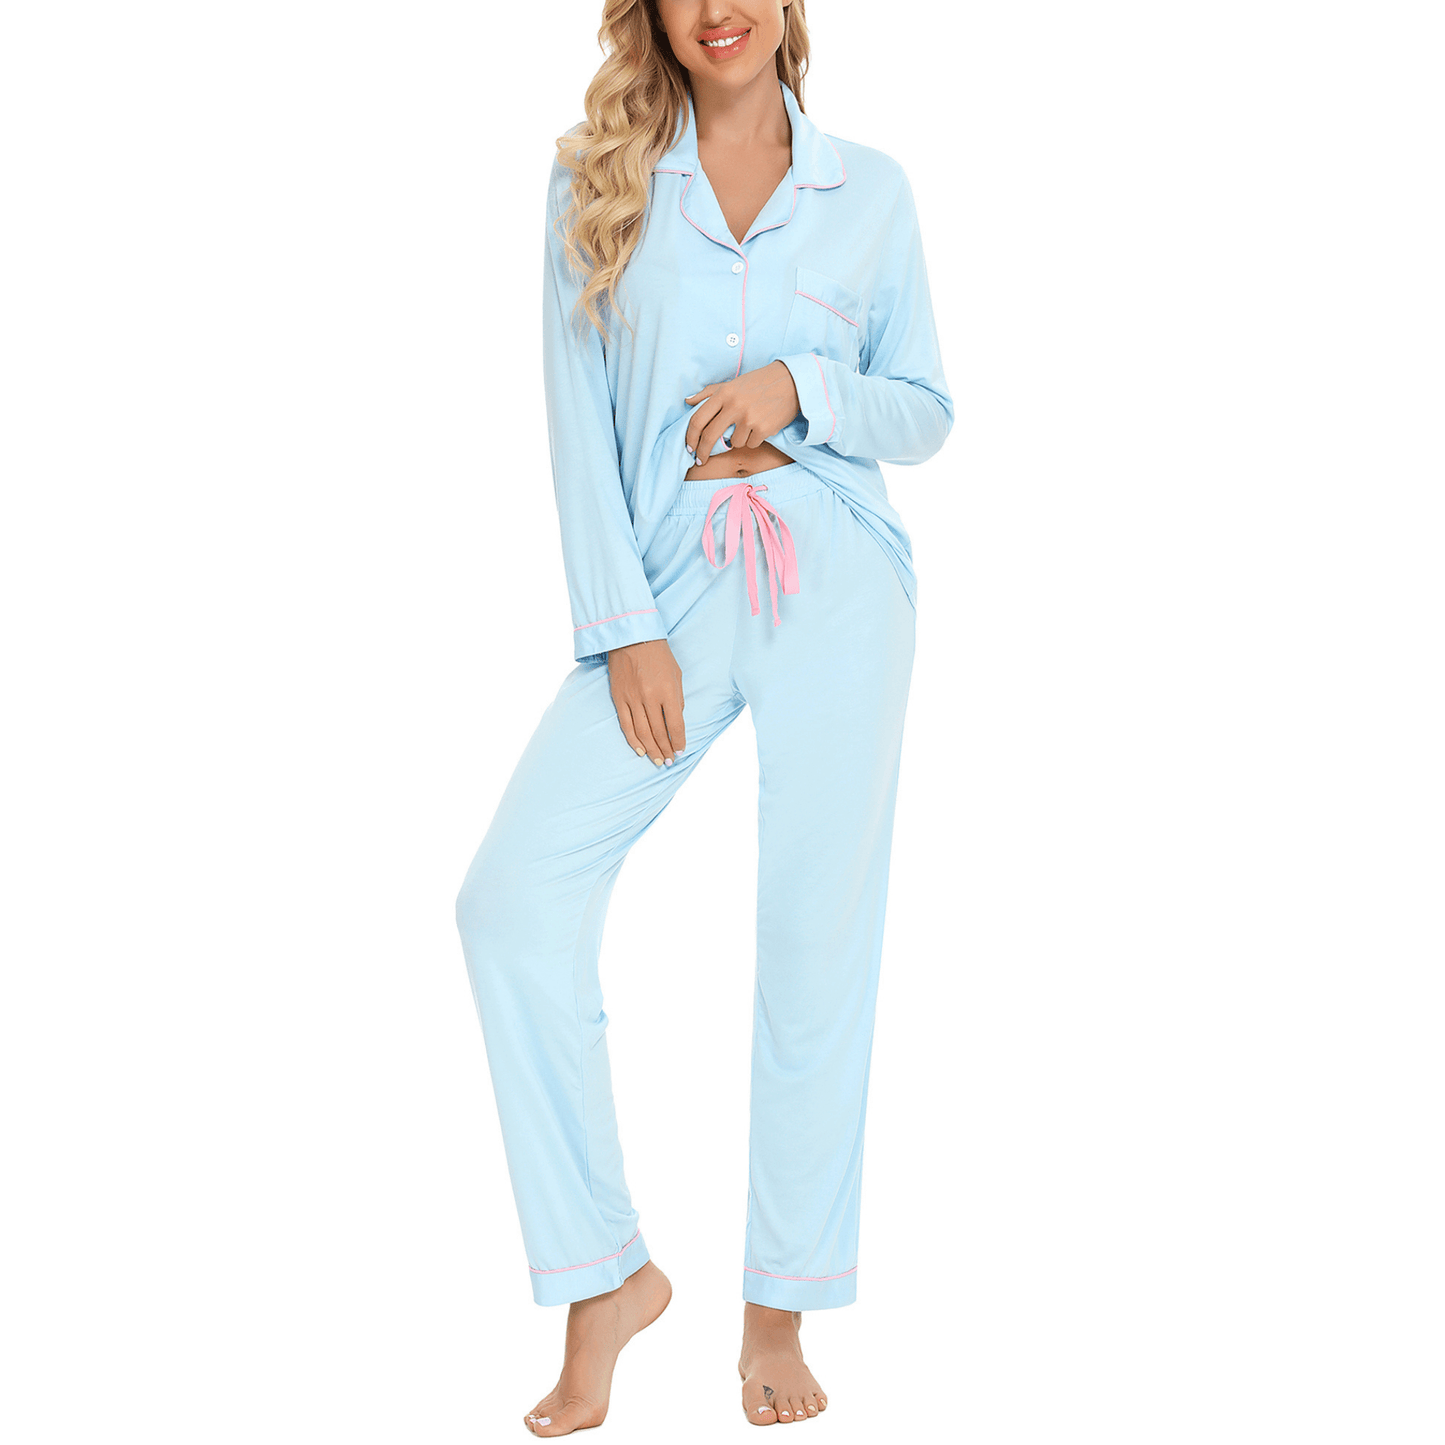 Silky soft bamboo sleepwear sets in baby blue and contrast pink piping and drawstring